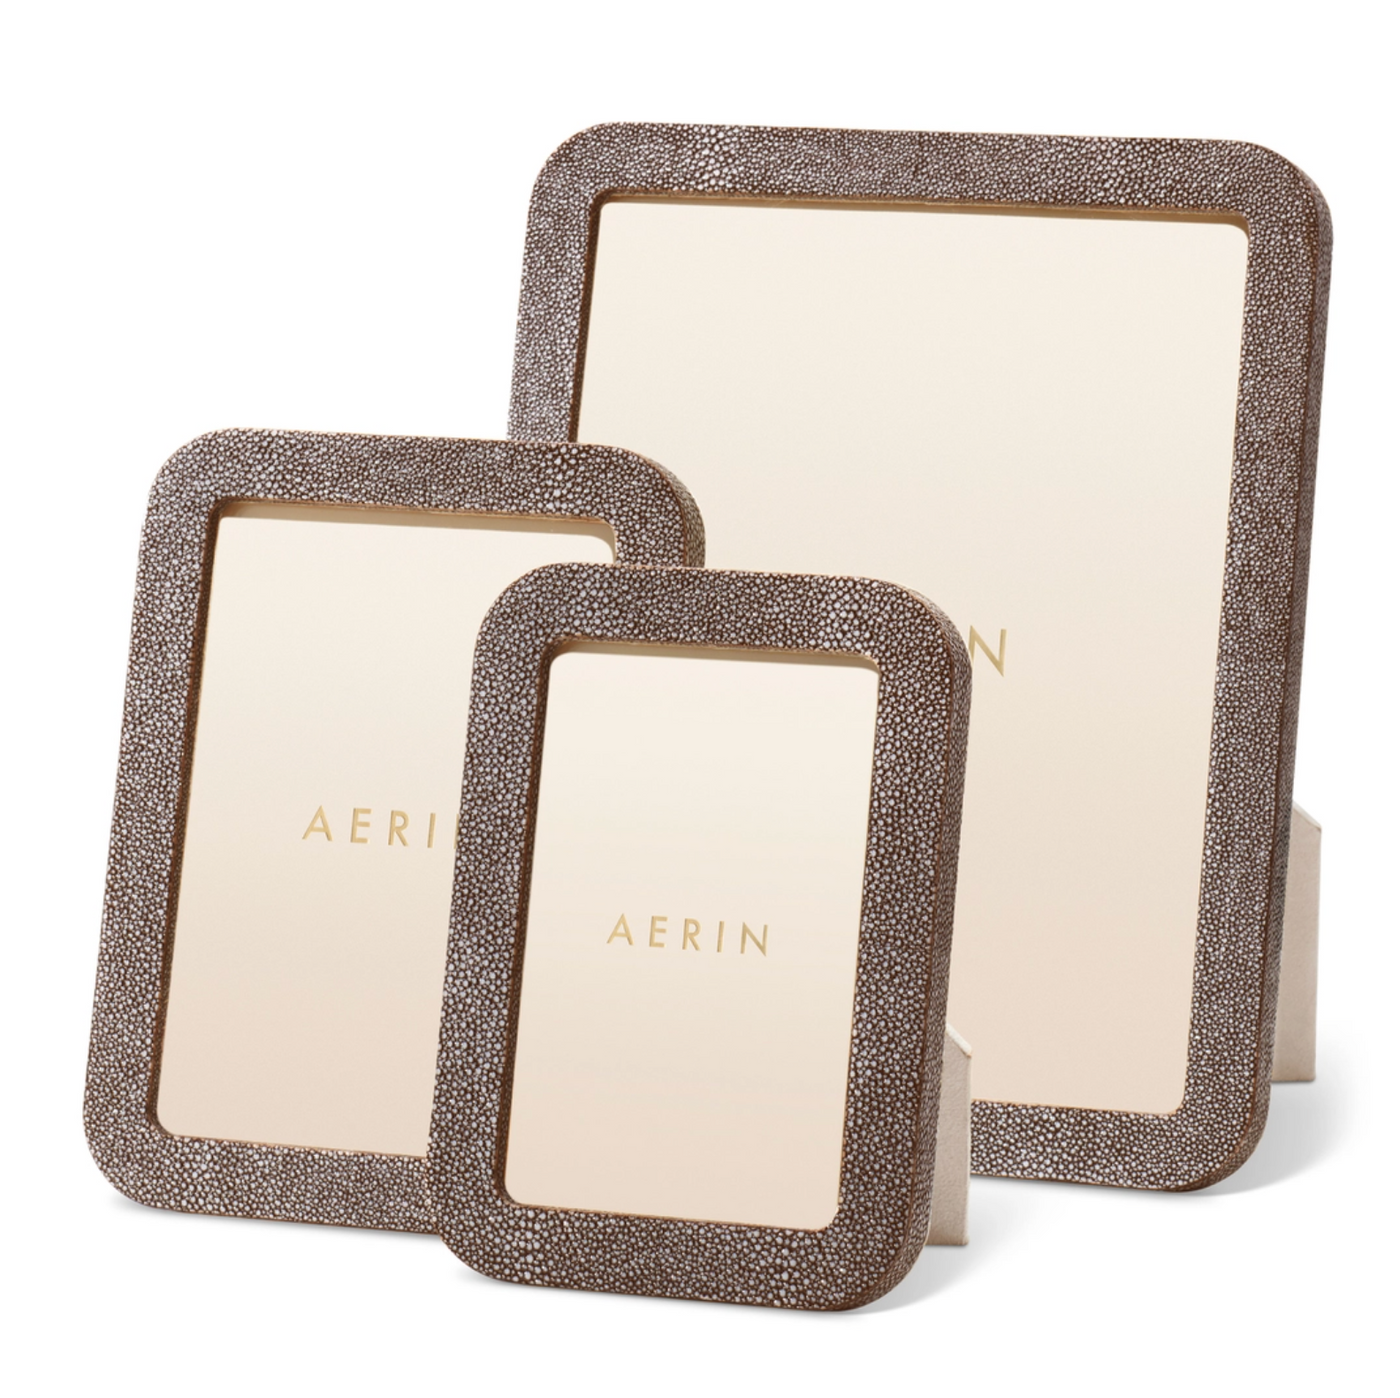 AERIN FRAME MODERN SHAGREEN CHOCOLATE (Available in 3 Sizes)